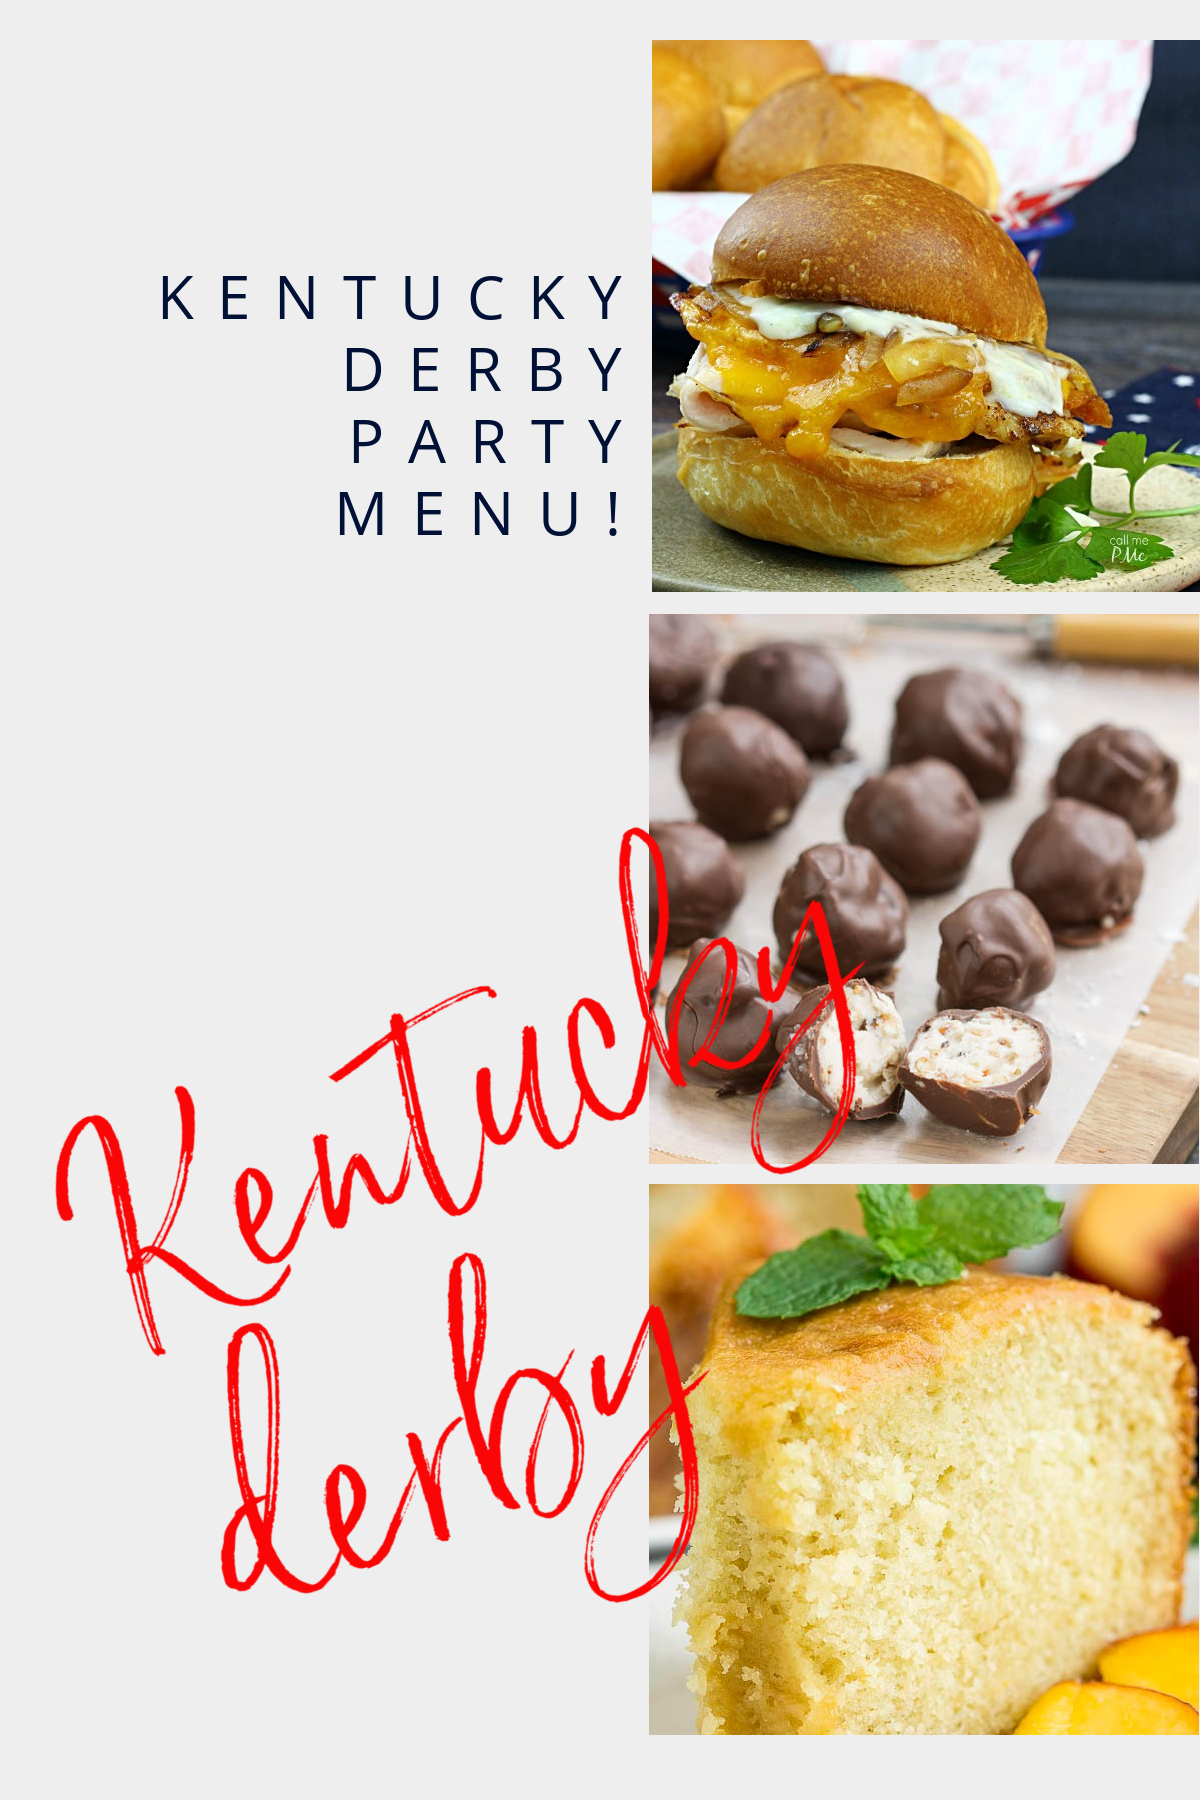 More than 20 Kentucky Derby Party Recipes to serve your guests for an unforgettable Kentucky Derby party!